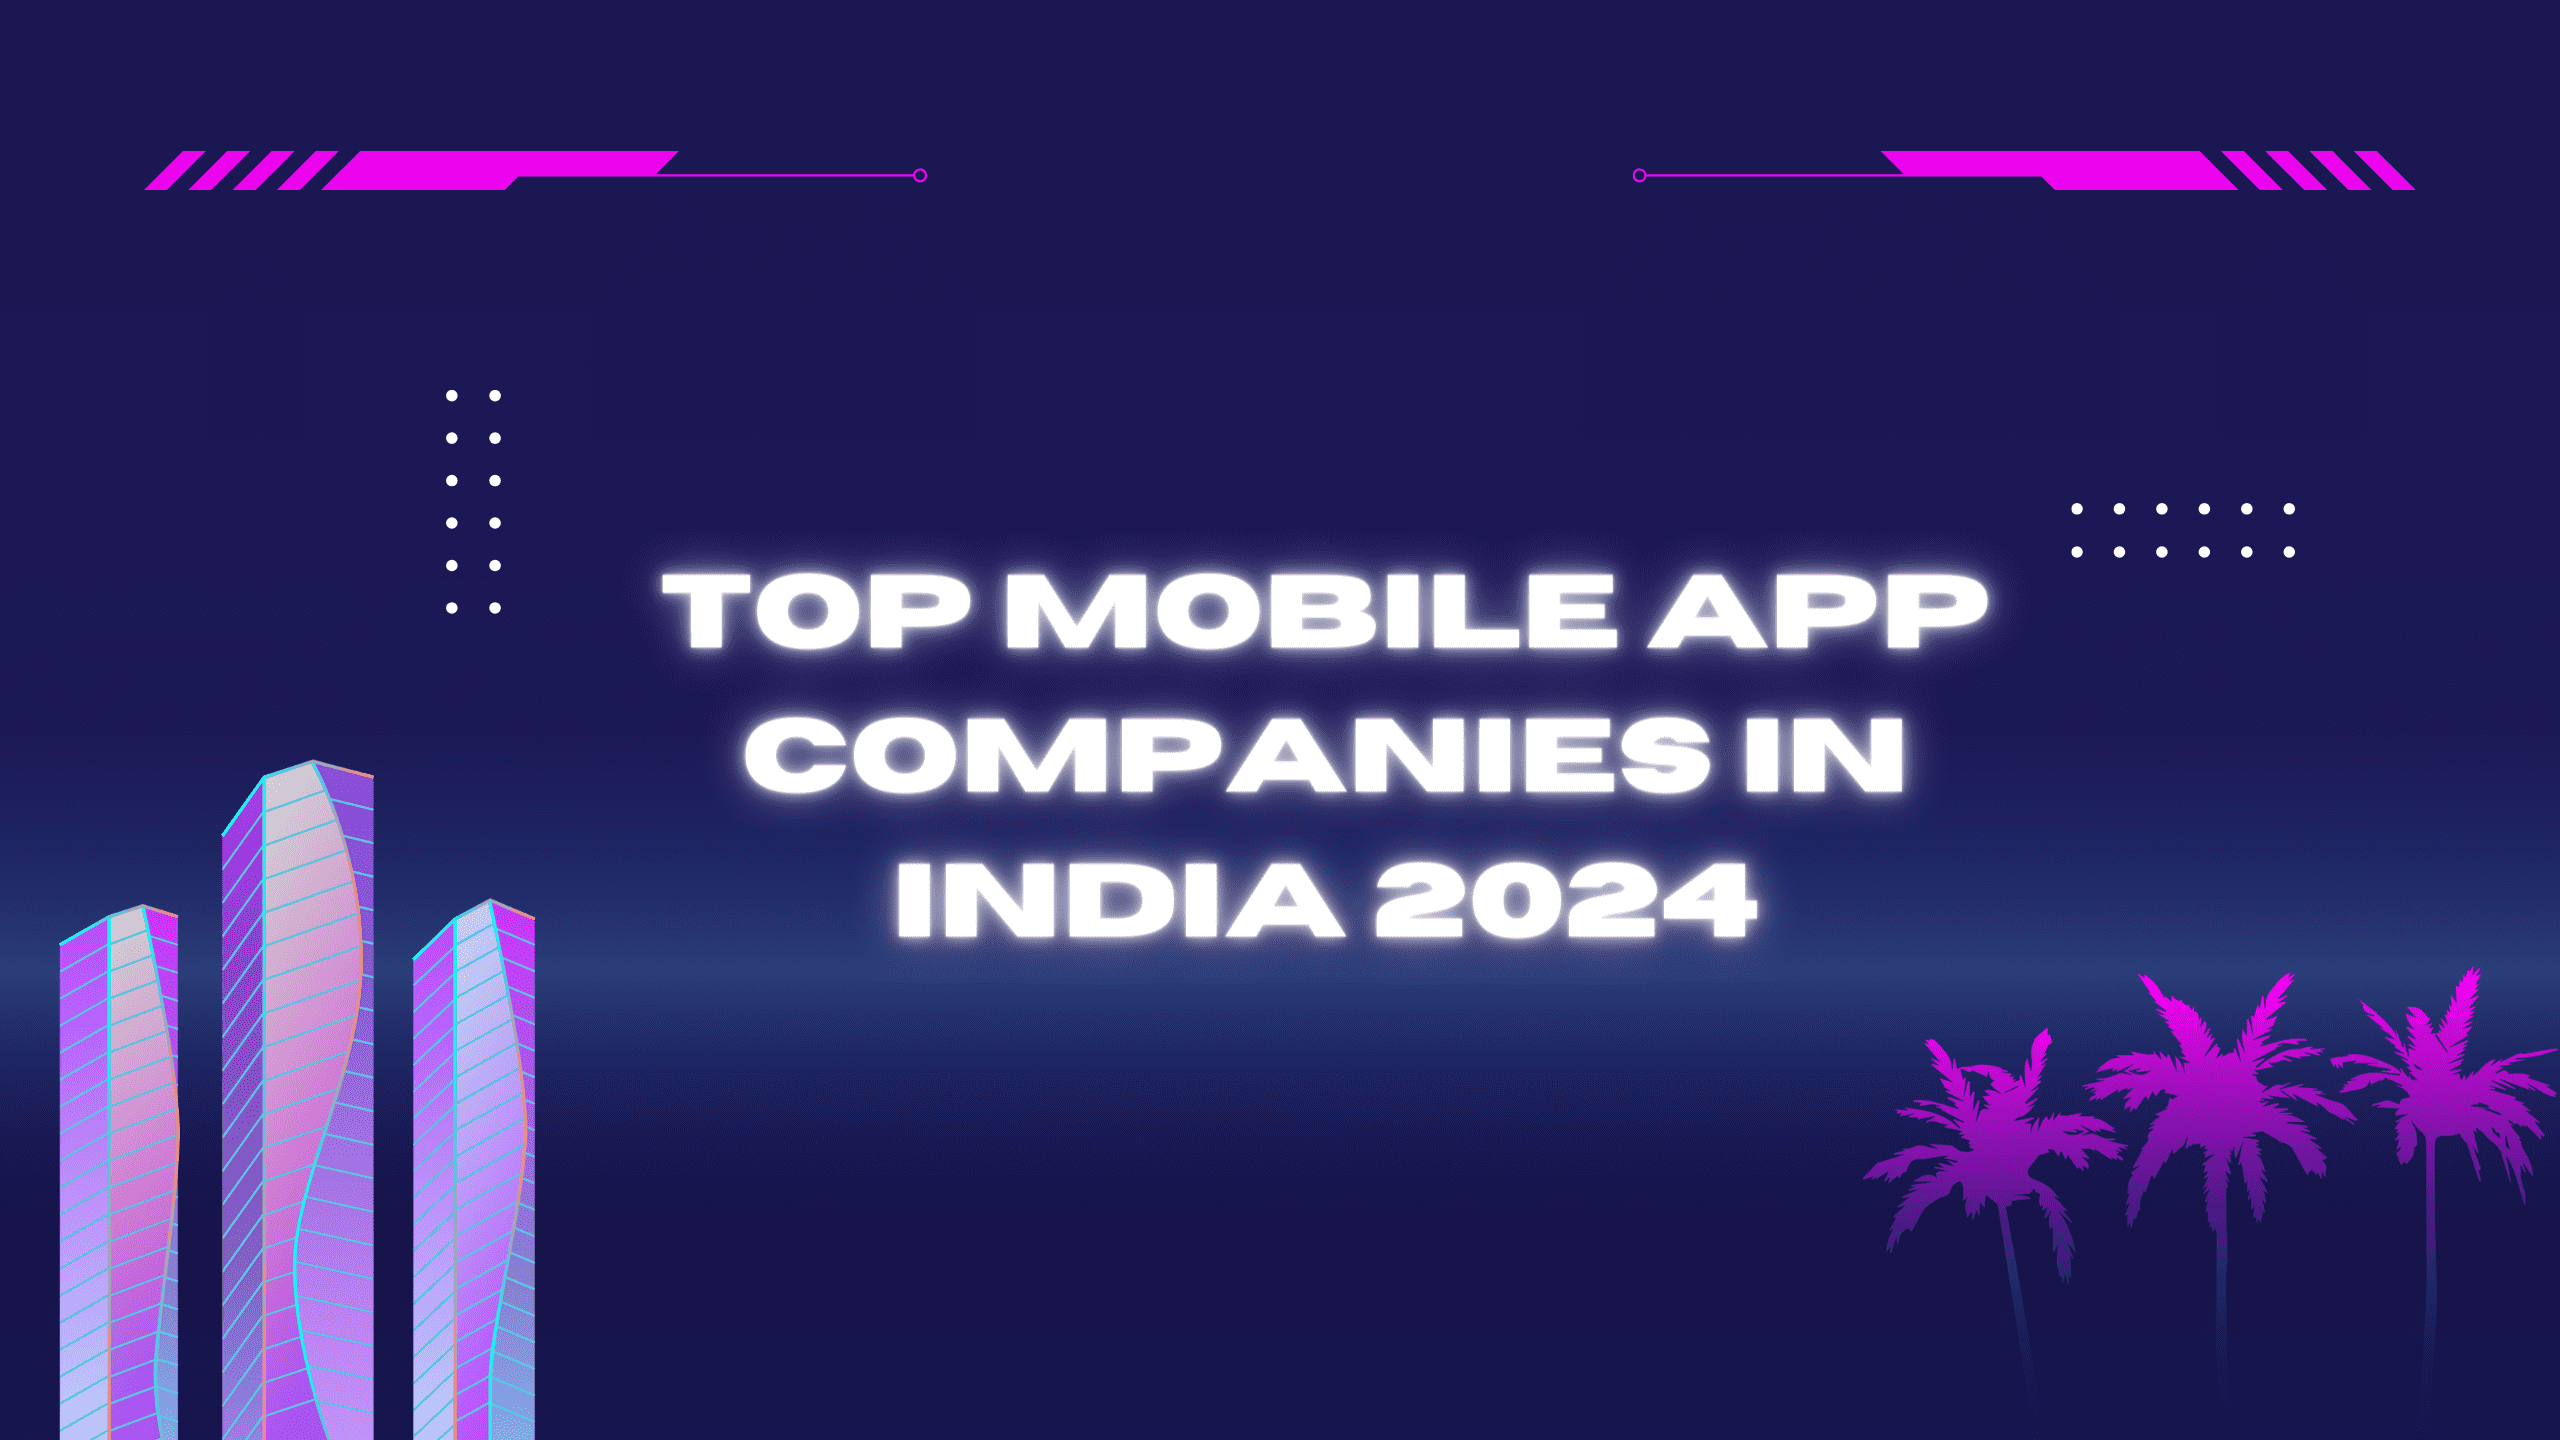 Top Mobile App Companies in India 2024